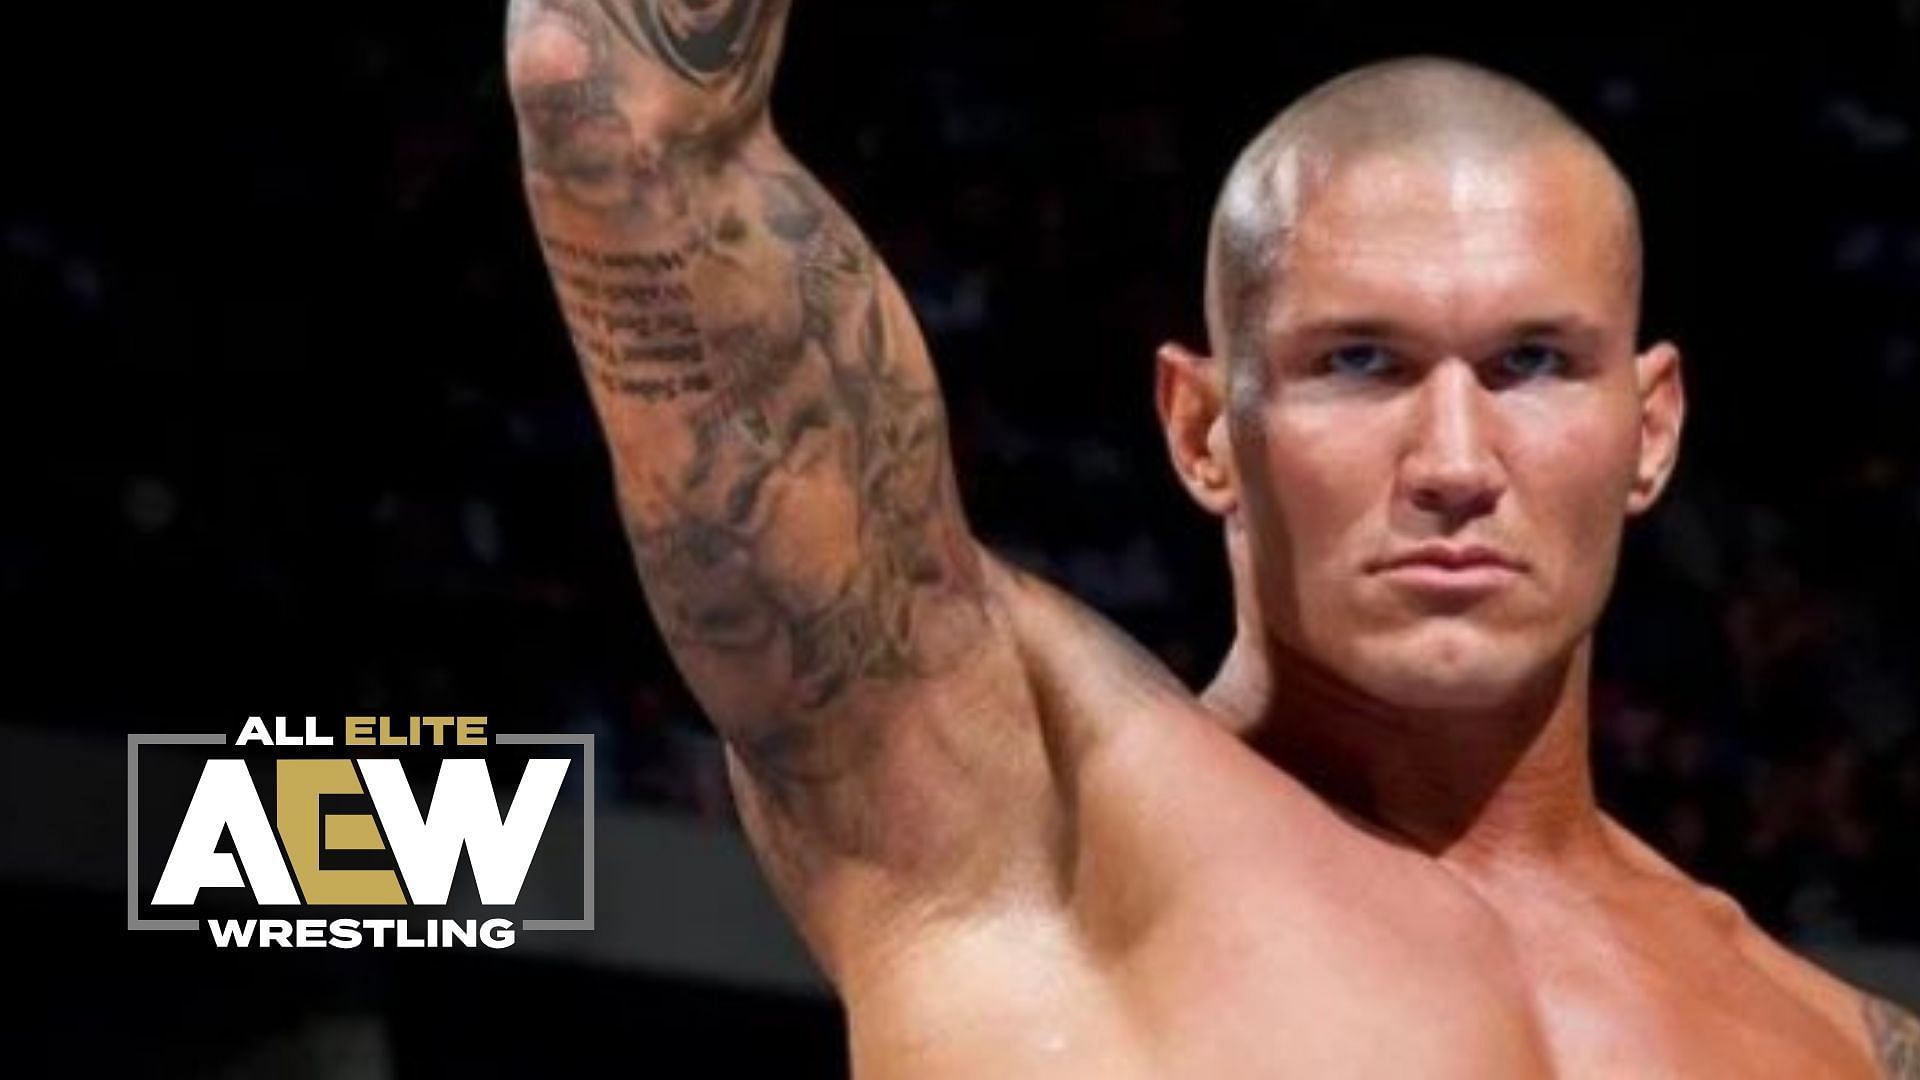 Randy Orton was excited to work with an AEW star during his time in WWE